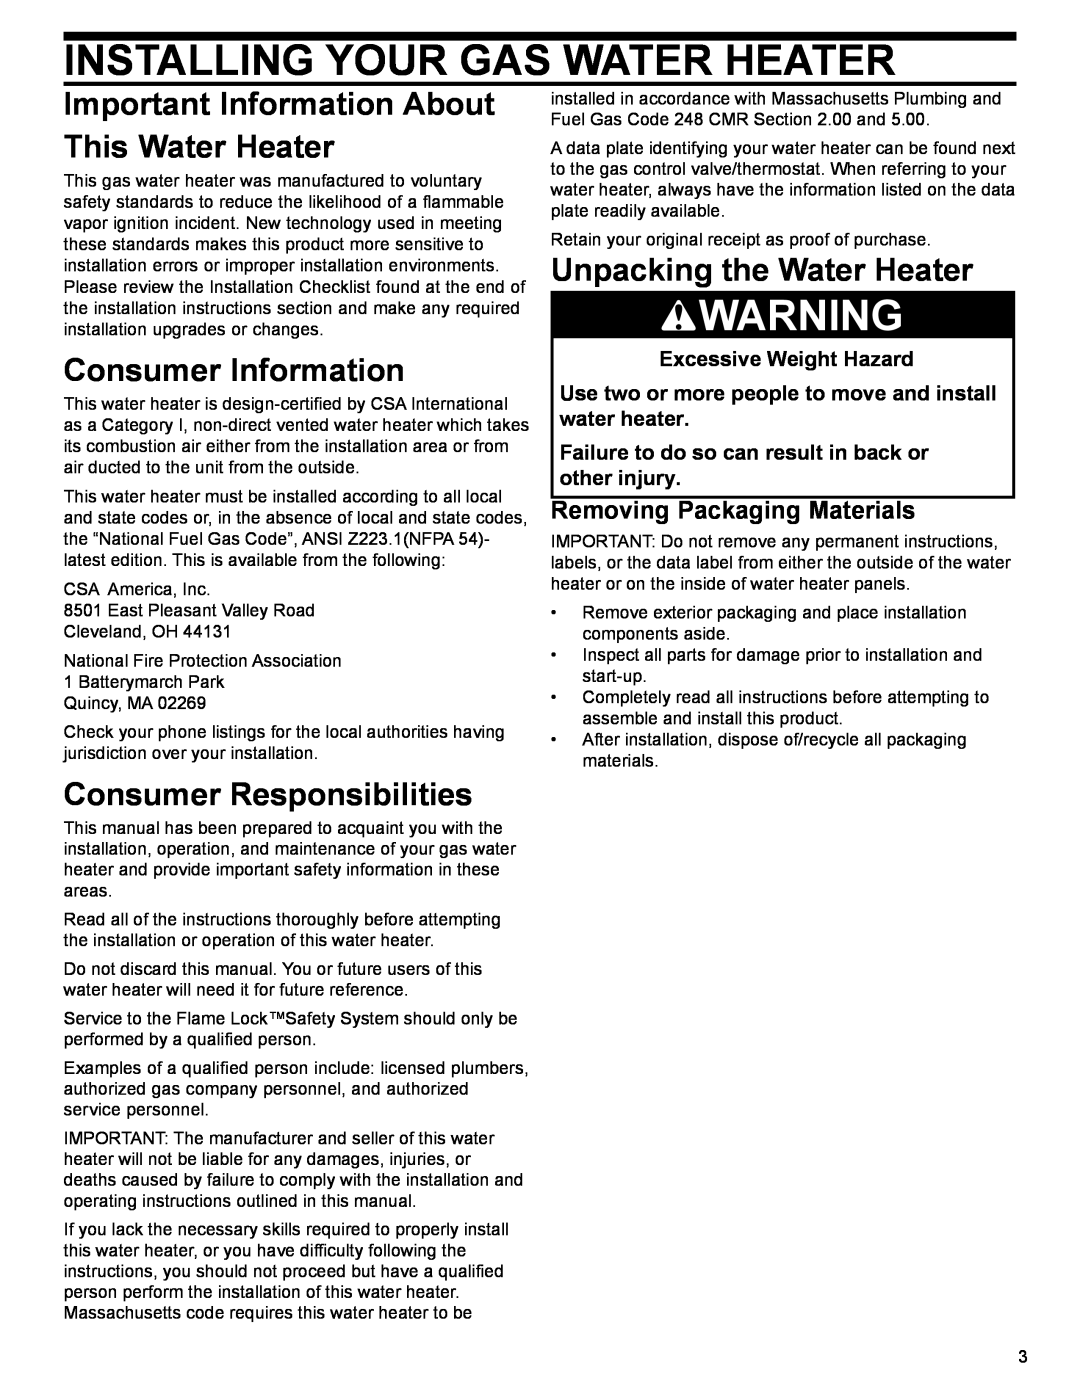 Whirlpool SG1J4040T3NOV 7K, 315422-000 Installing Your Gas Water Heater, Important Information About This Water Heater 